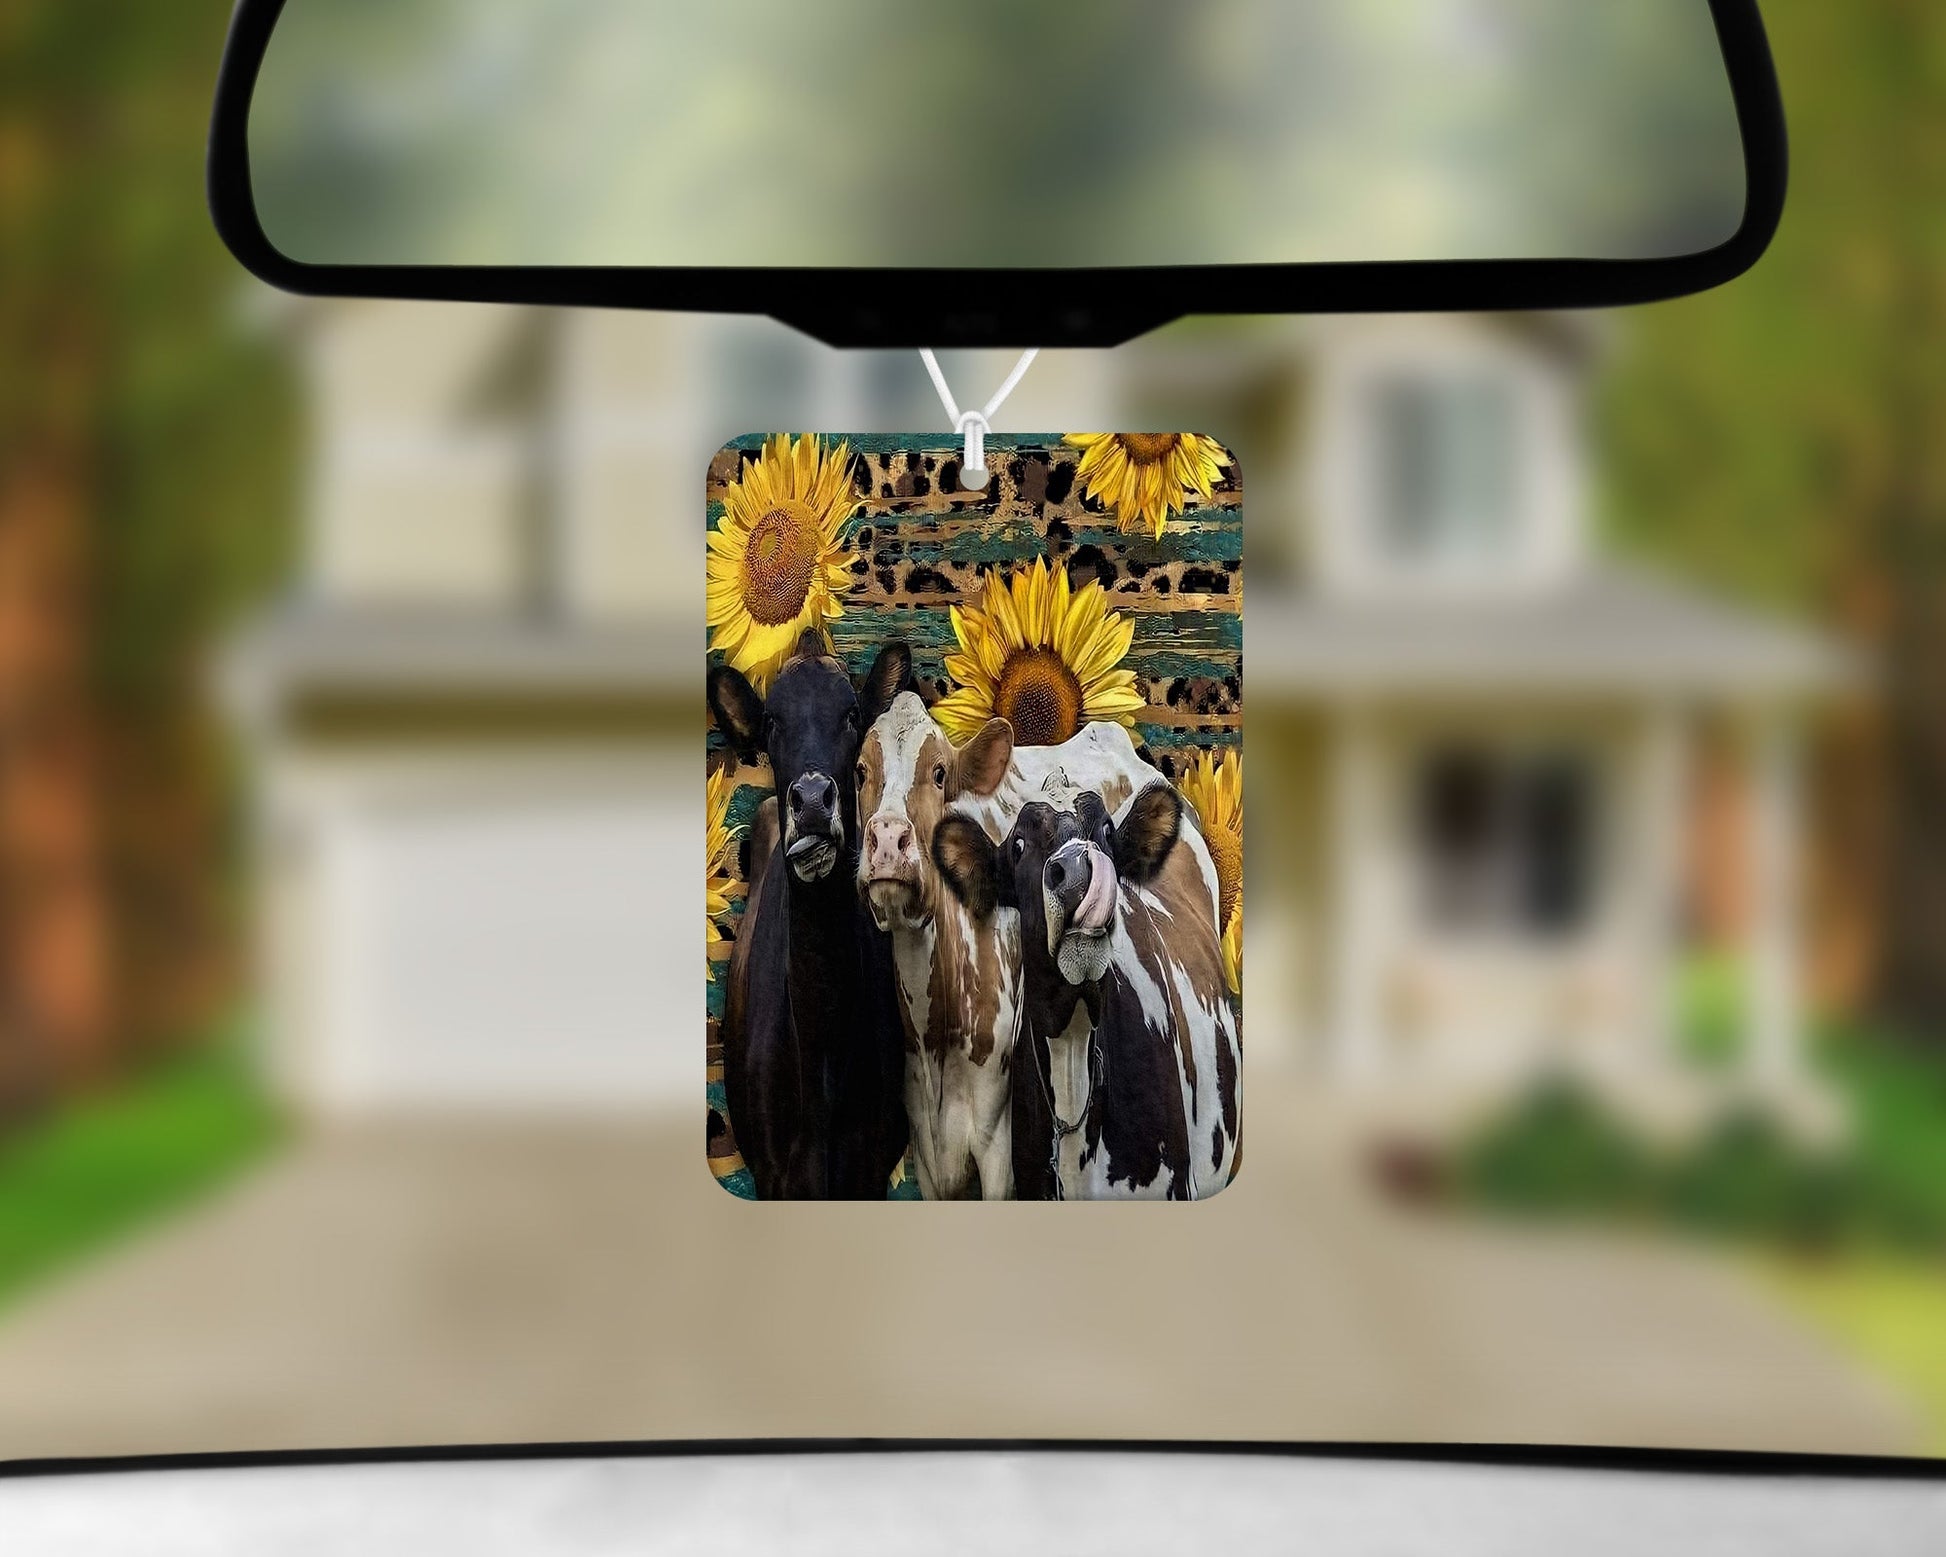 Sunflower Cows|Freshie|Includes Scent Bottle - Vehicle Air Freshener